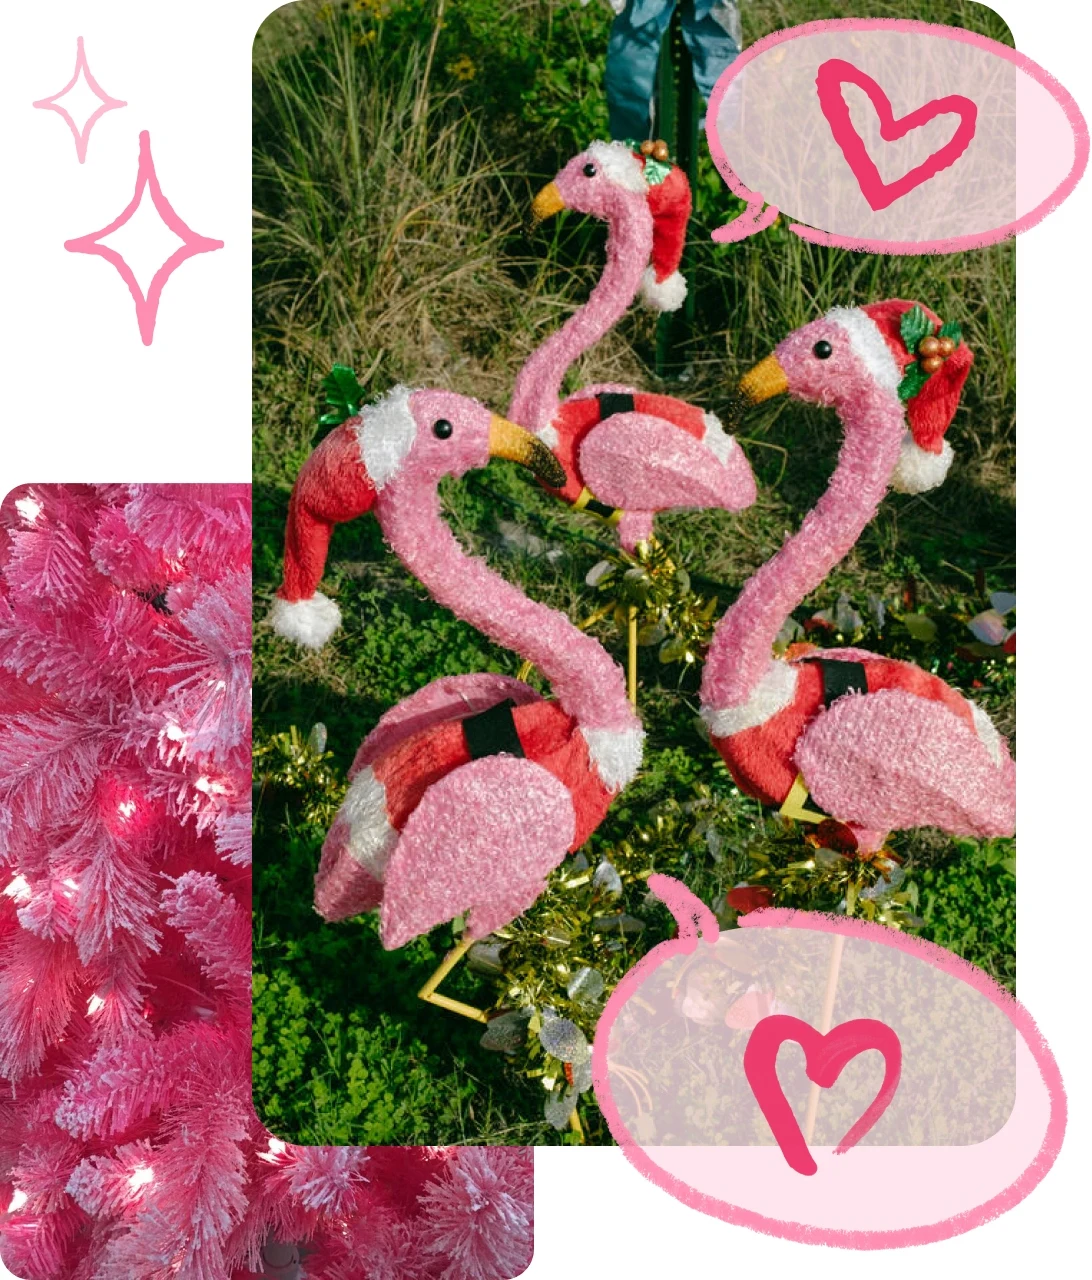 Pin collage of decorative pink flamigo lawn ornaments wearing santa hats, with speech bubble illstrations